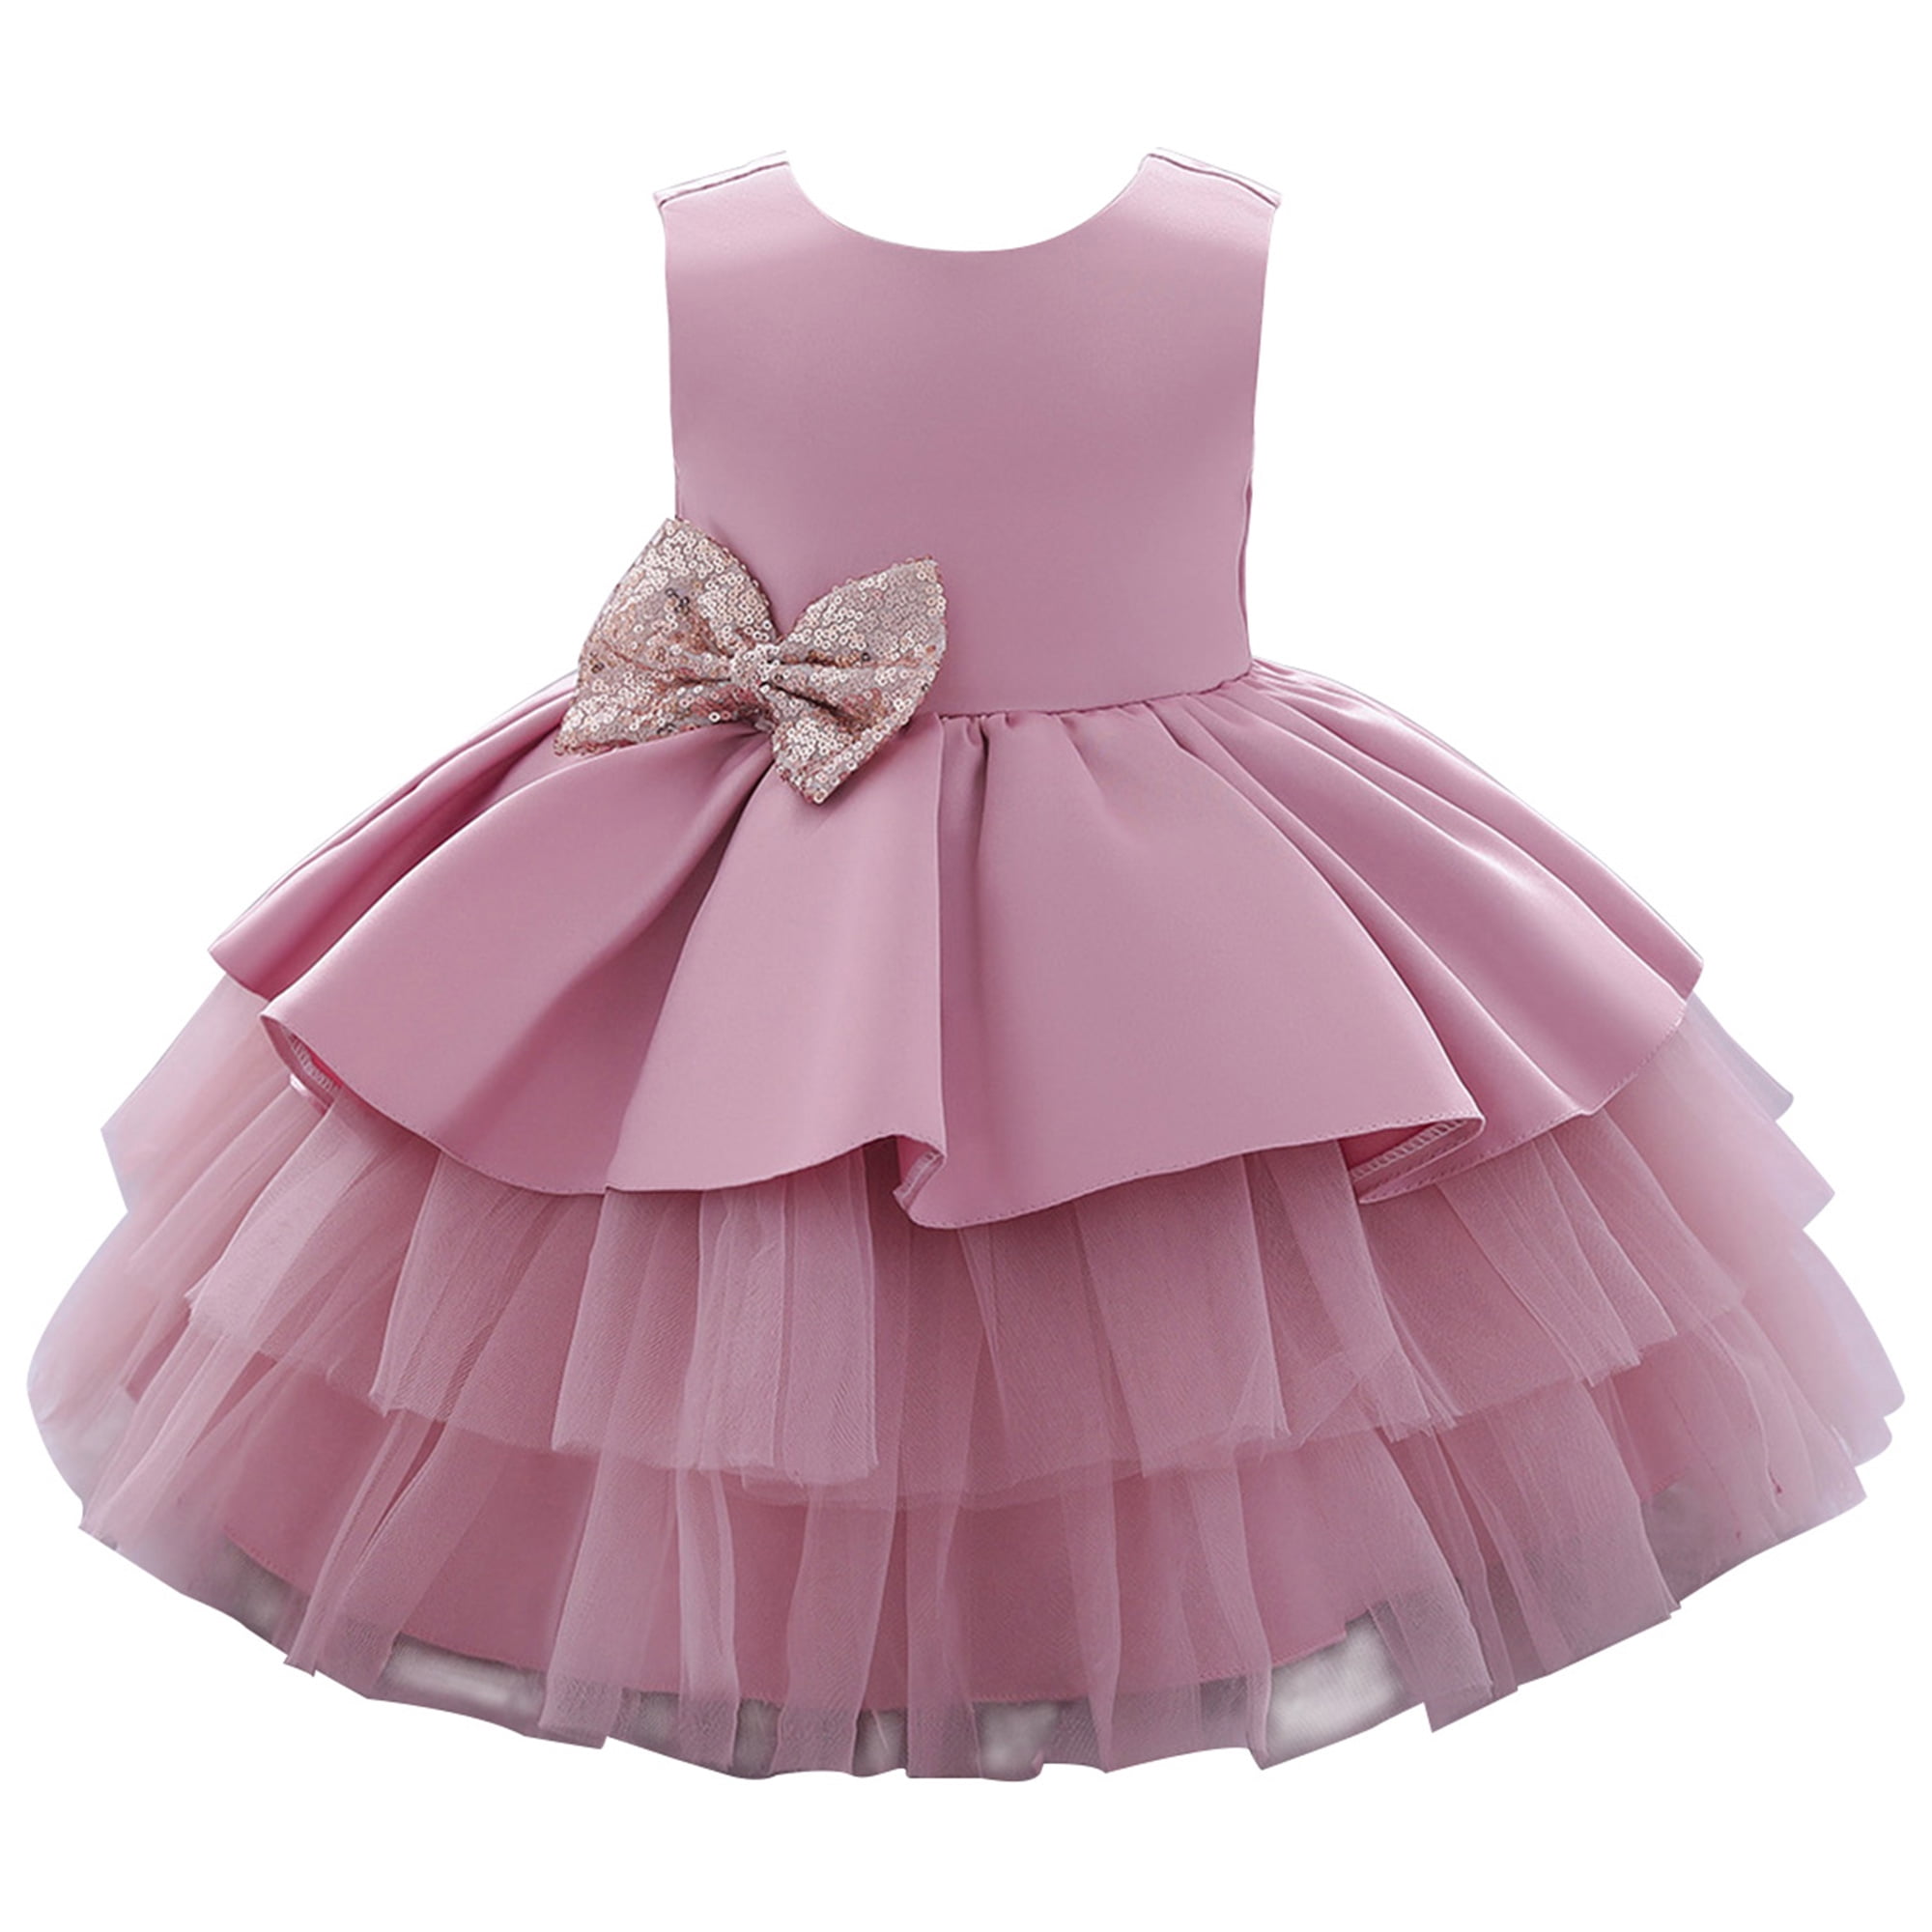 Cute Bowknot Baptism Dresses Infant Baby Girl Dress Pageant Christening Gowns 